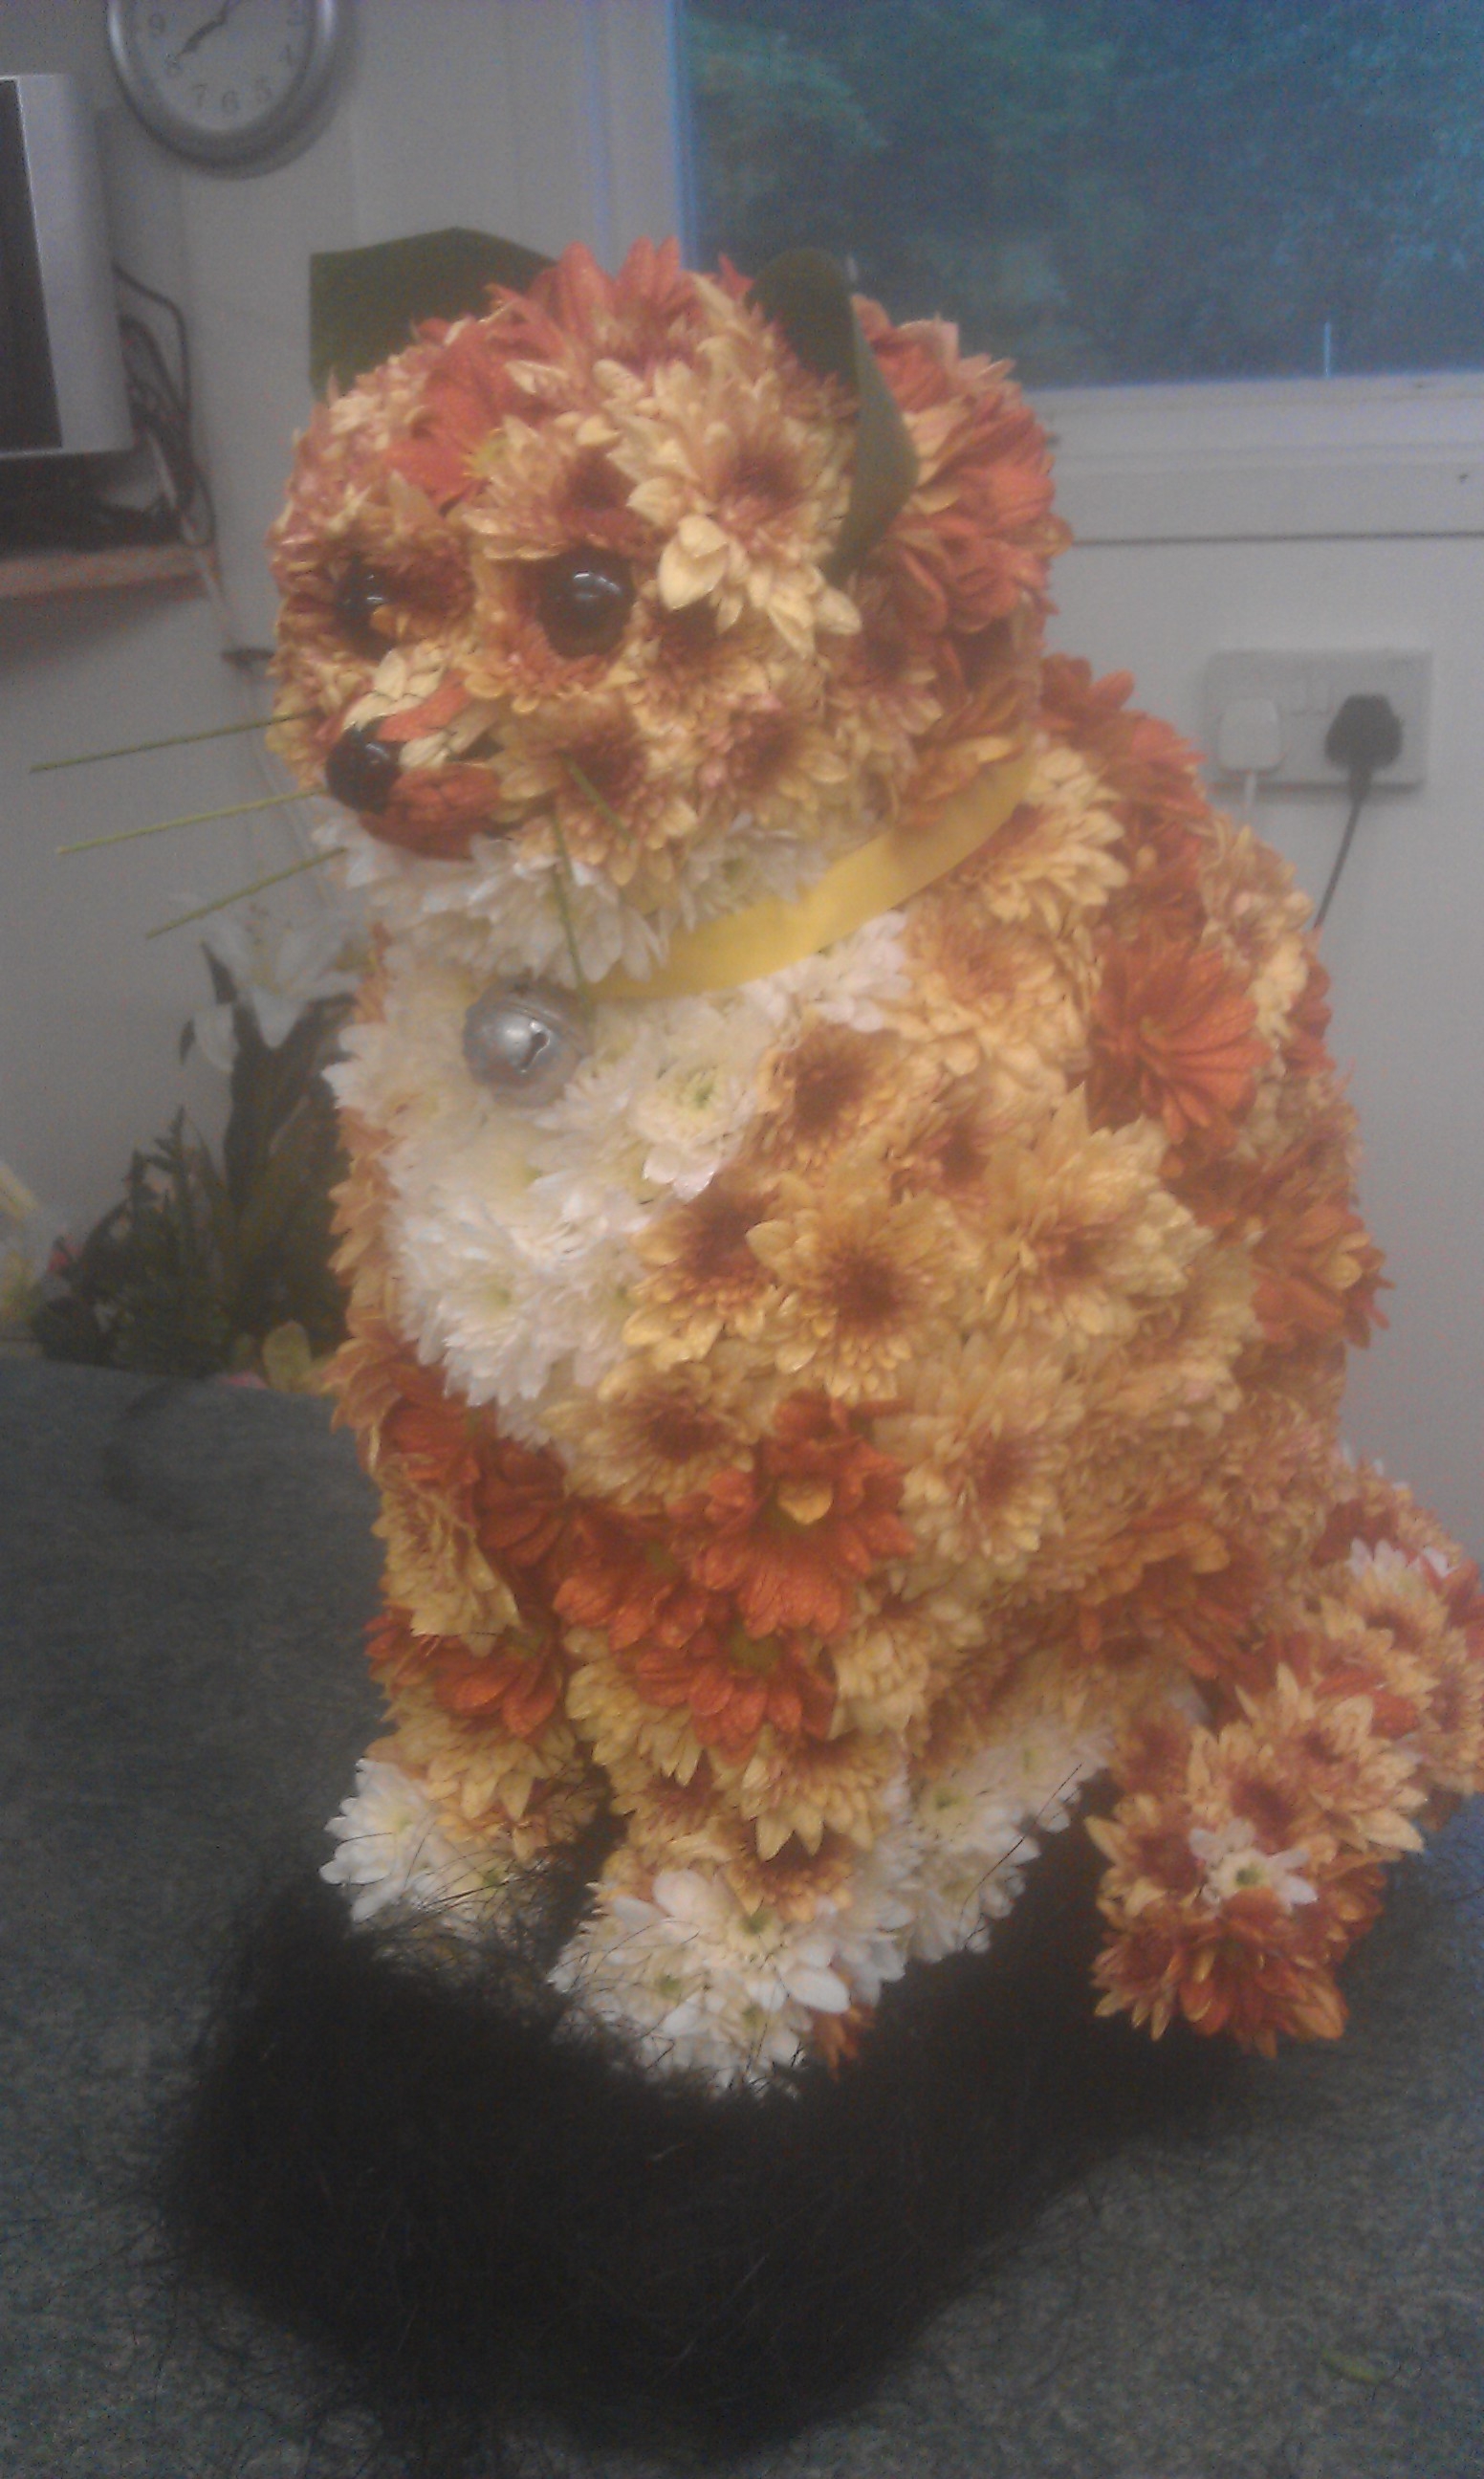 Ginger Cat made from flowers